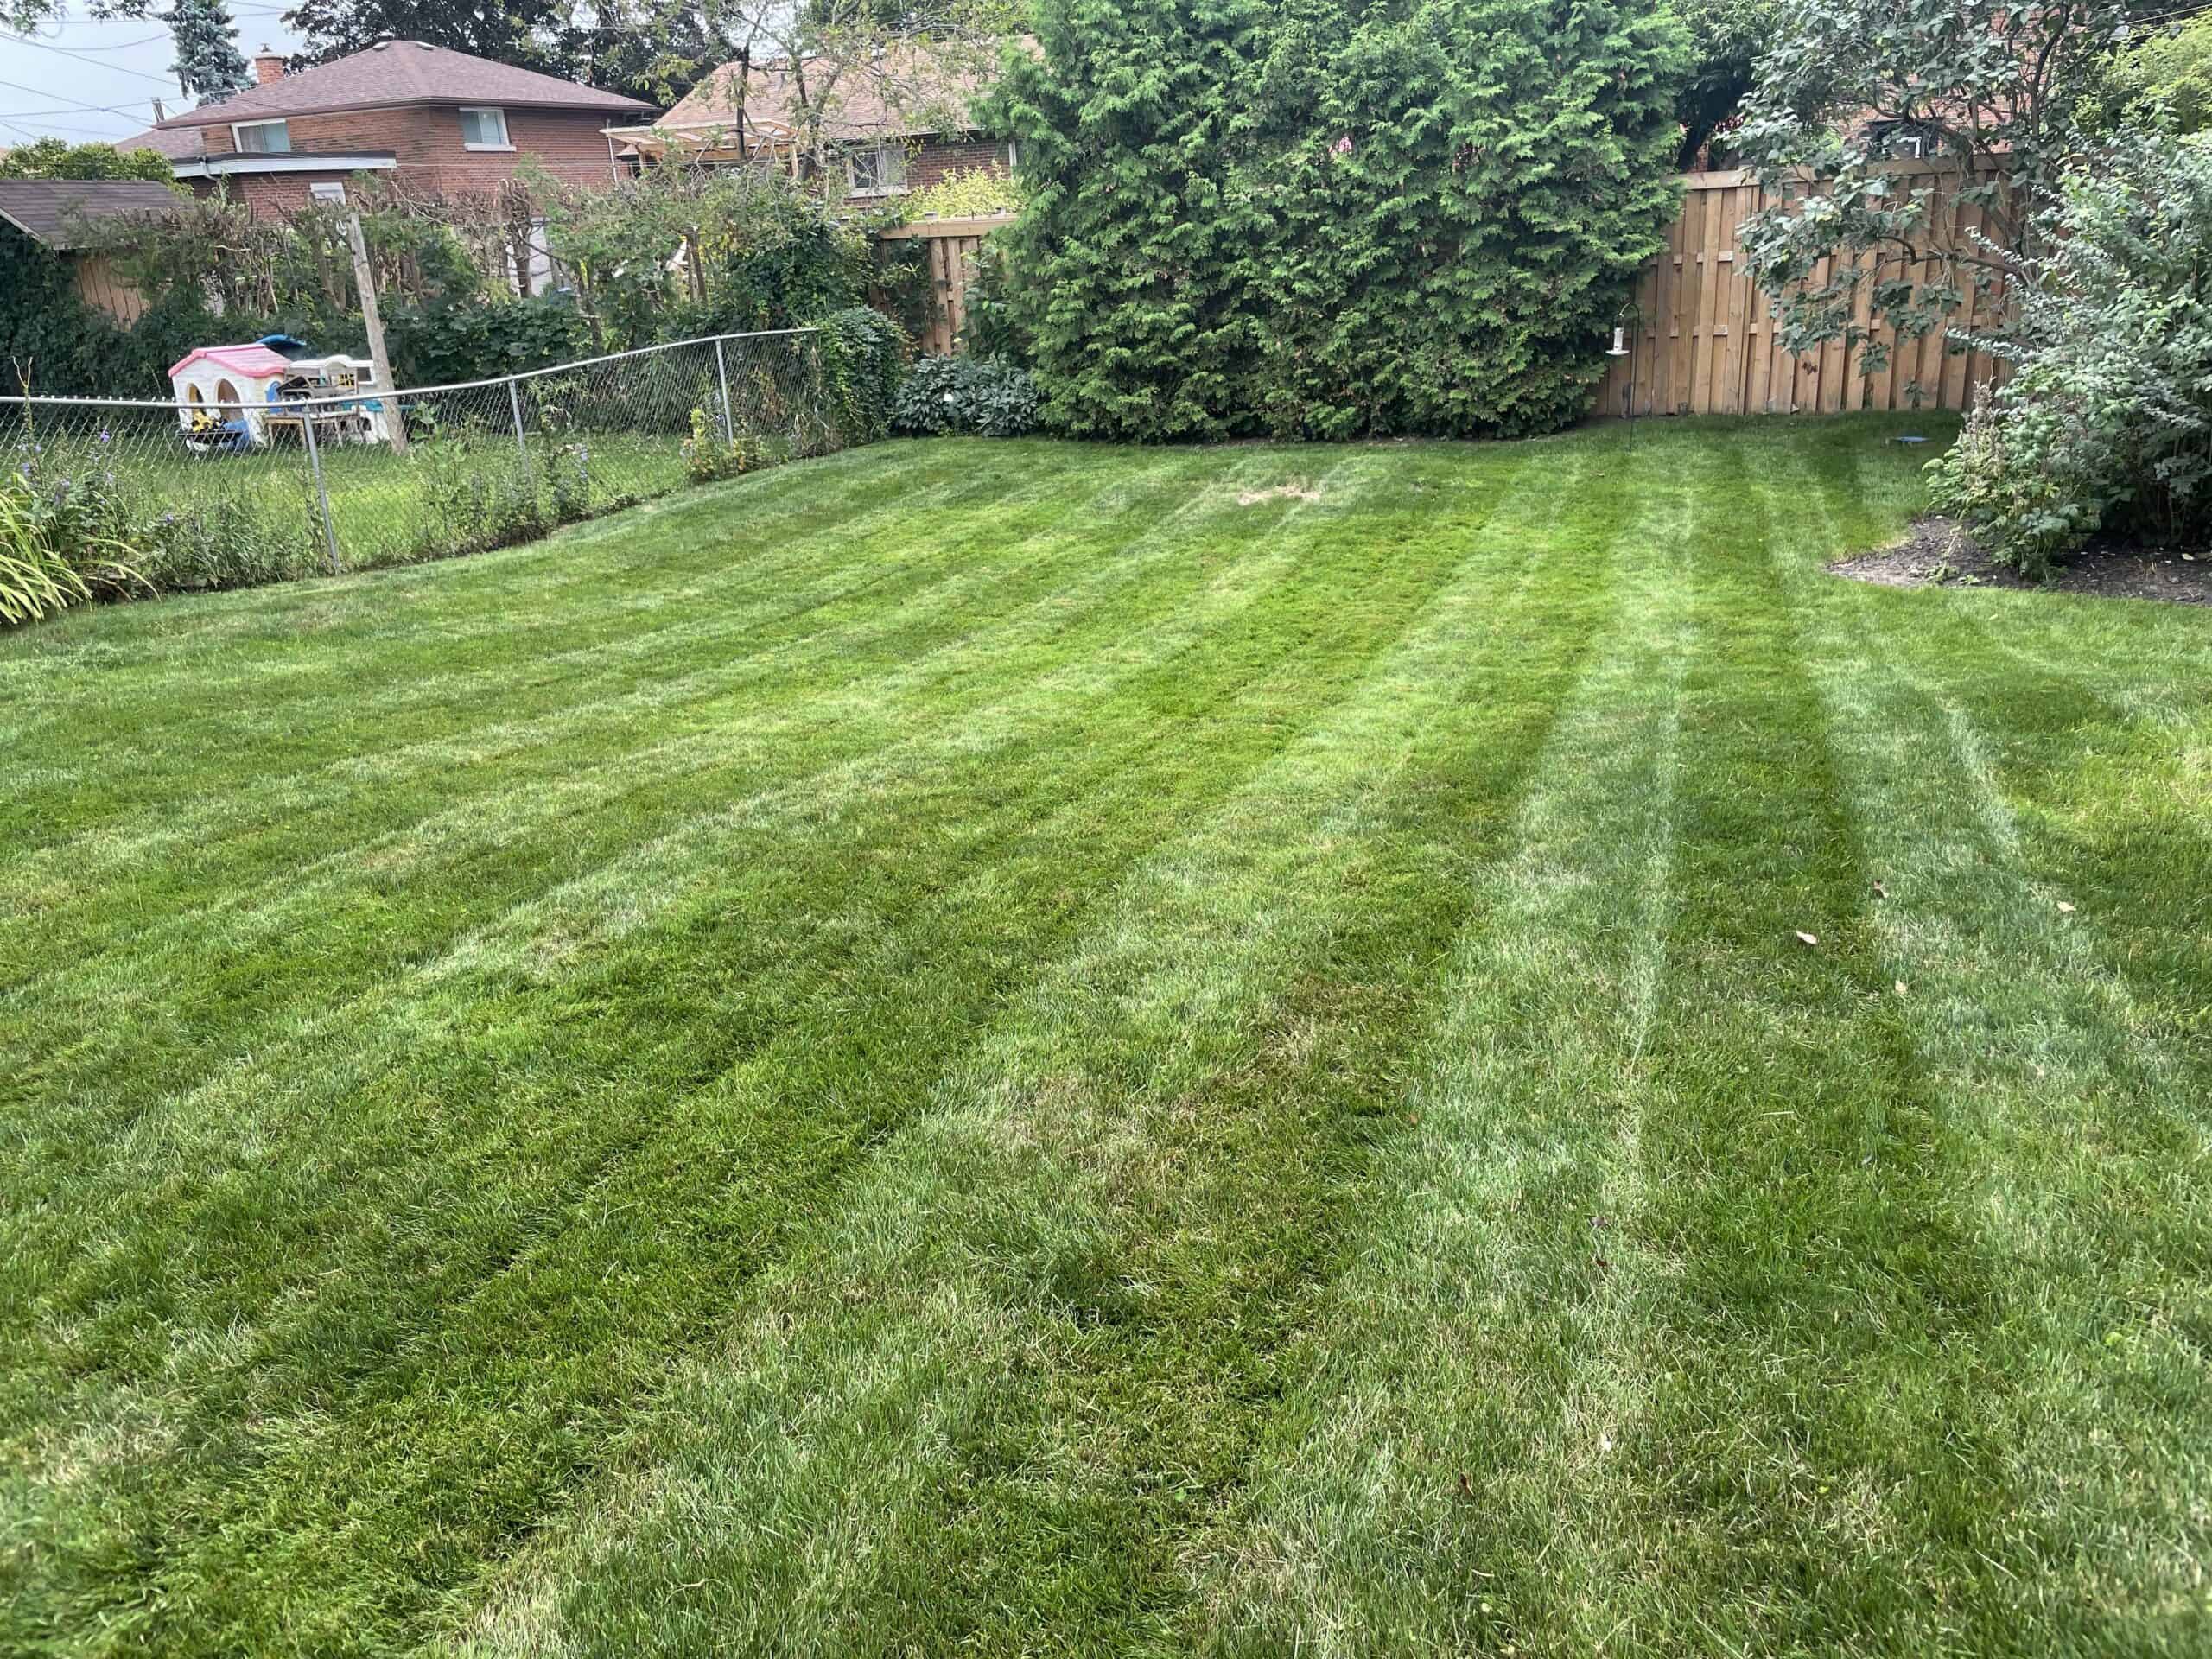 Mowing in Ontario ensures safe and appealing lawns for local homes and businesses